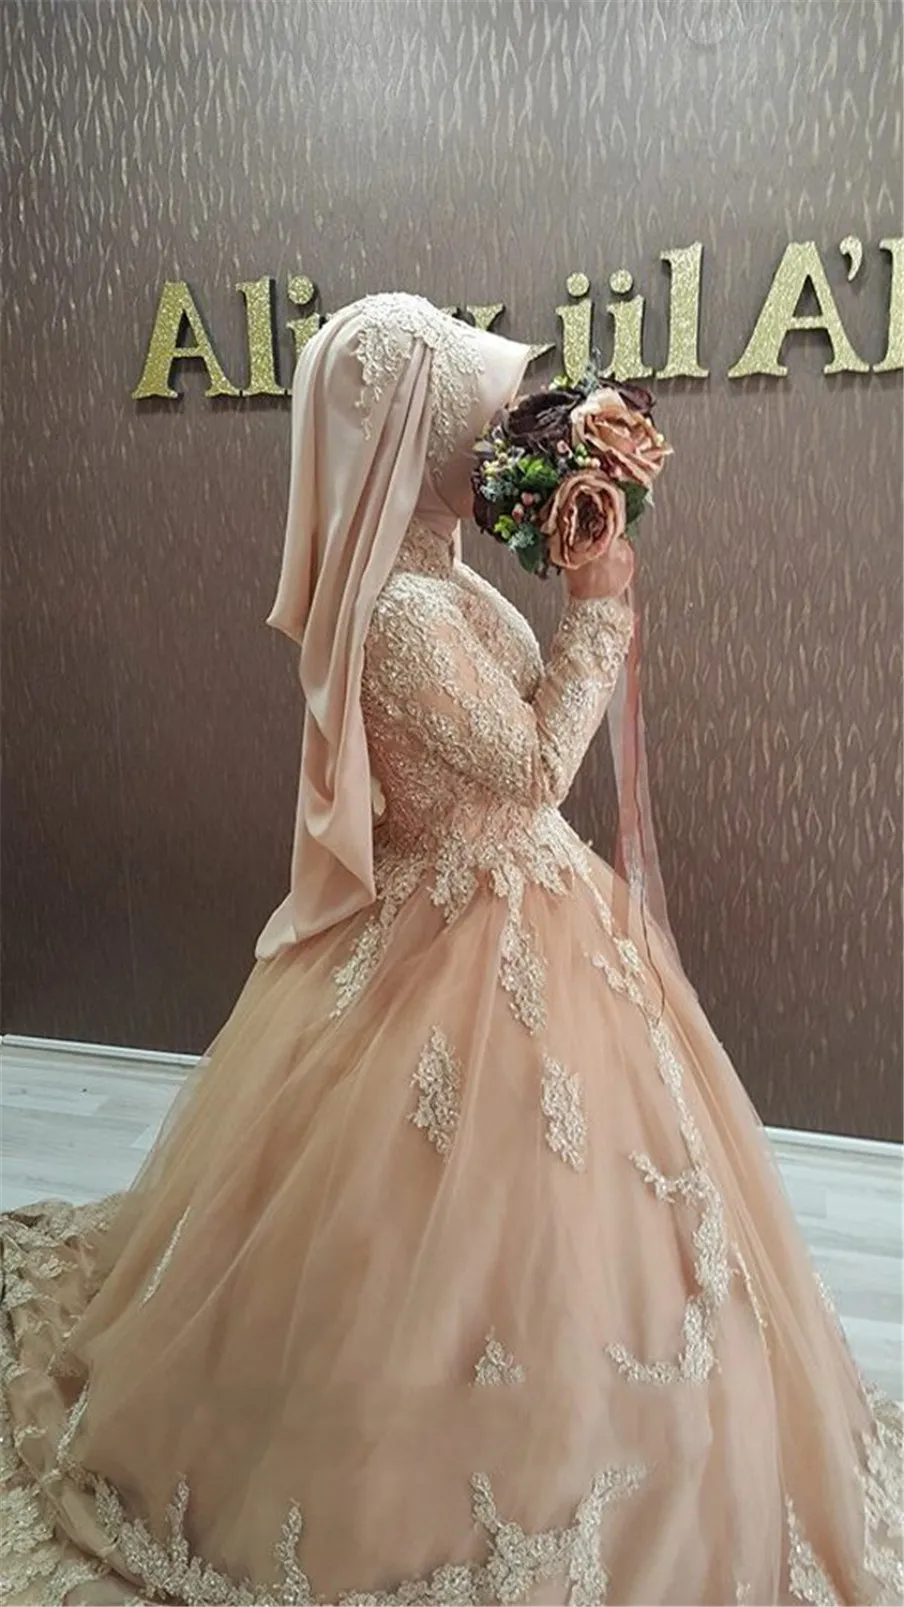 Long Sleeve Champagne Lace Applique High Neckline Muslim Wedding Gowns Islamic Wedding Dress With Hihab Robe De Mariage